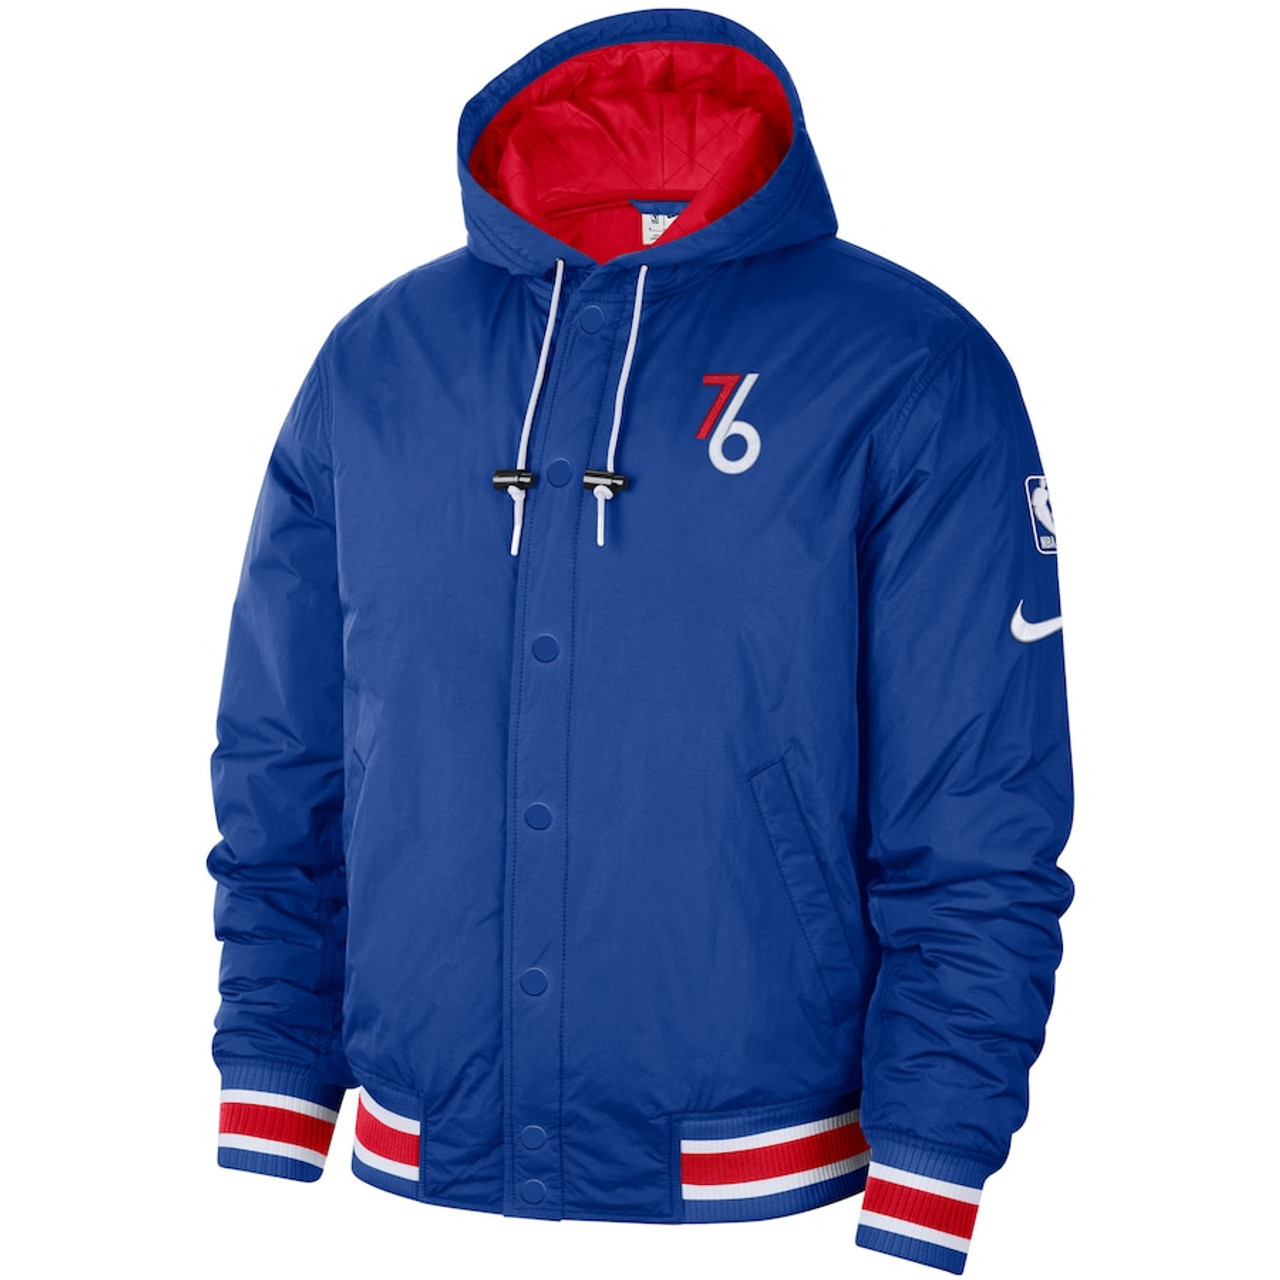 Sixers City Edition - 76ers - Hoodie